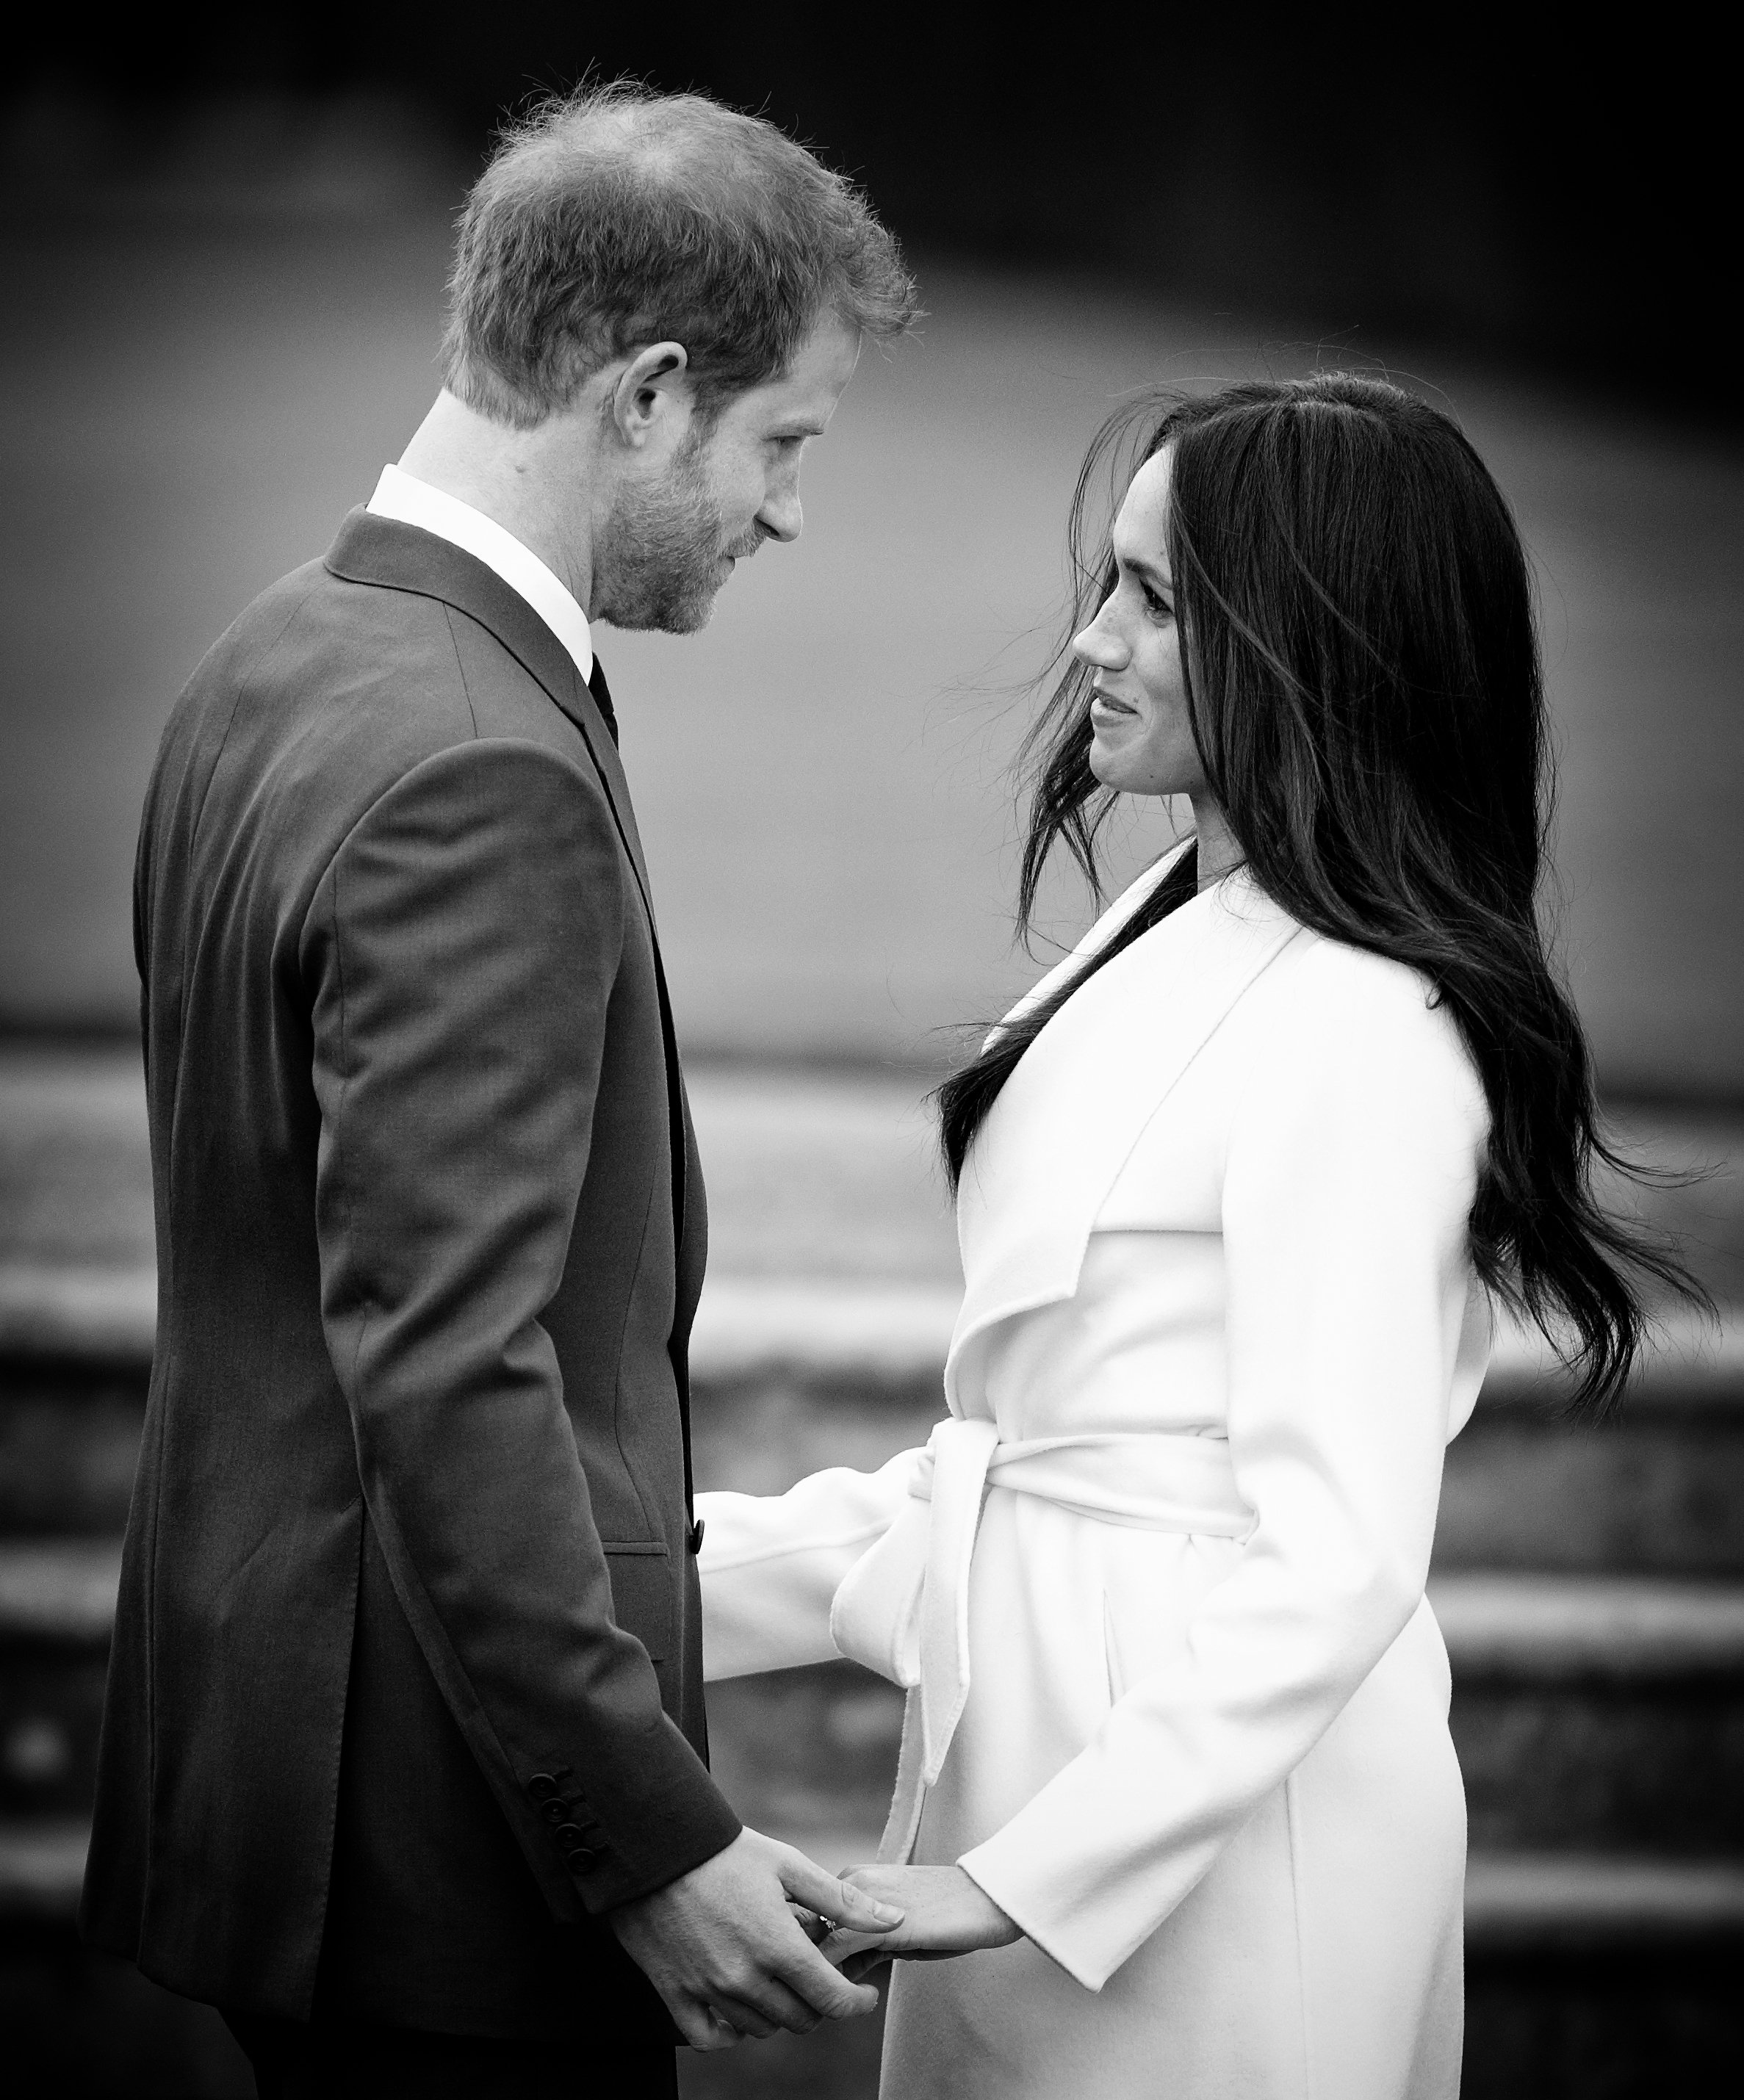 Prince Harry and Meghan Markle at an official photocall to announce their engagement at Kensington Palace on November 27, 2017, in London, England | Source: Getty Images